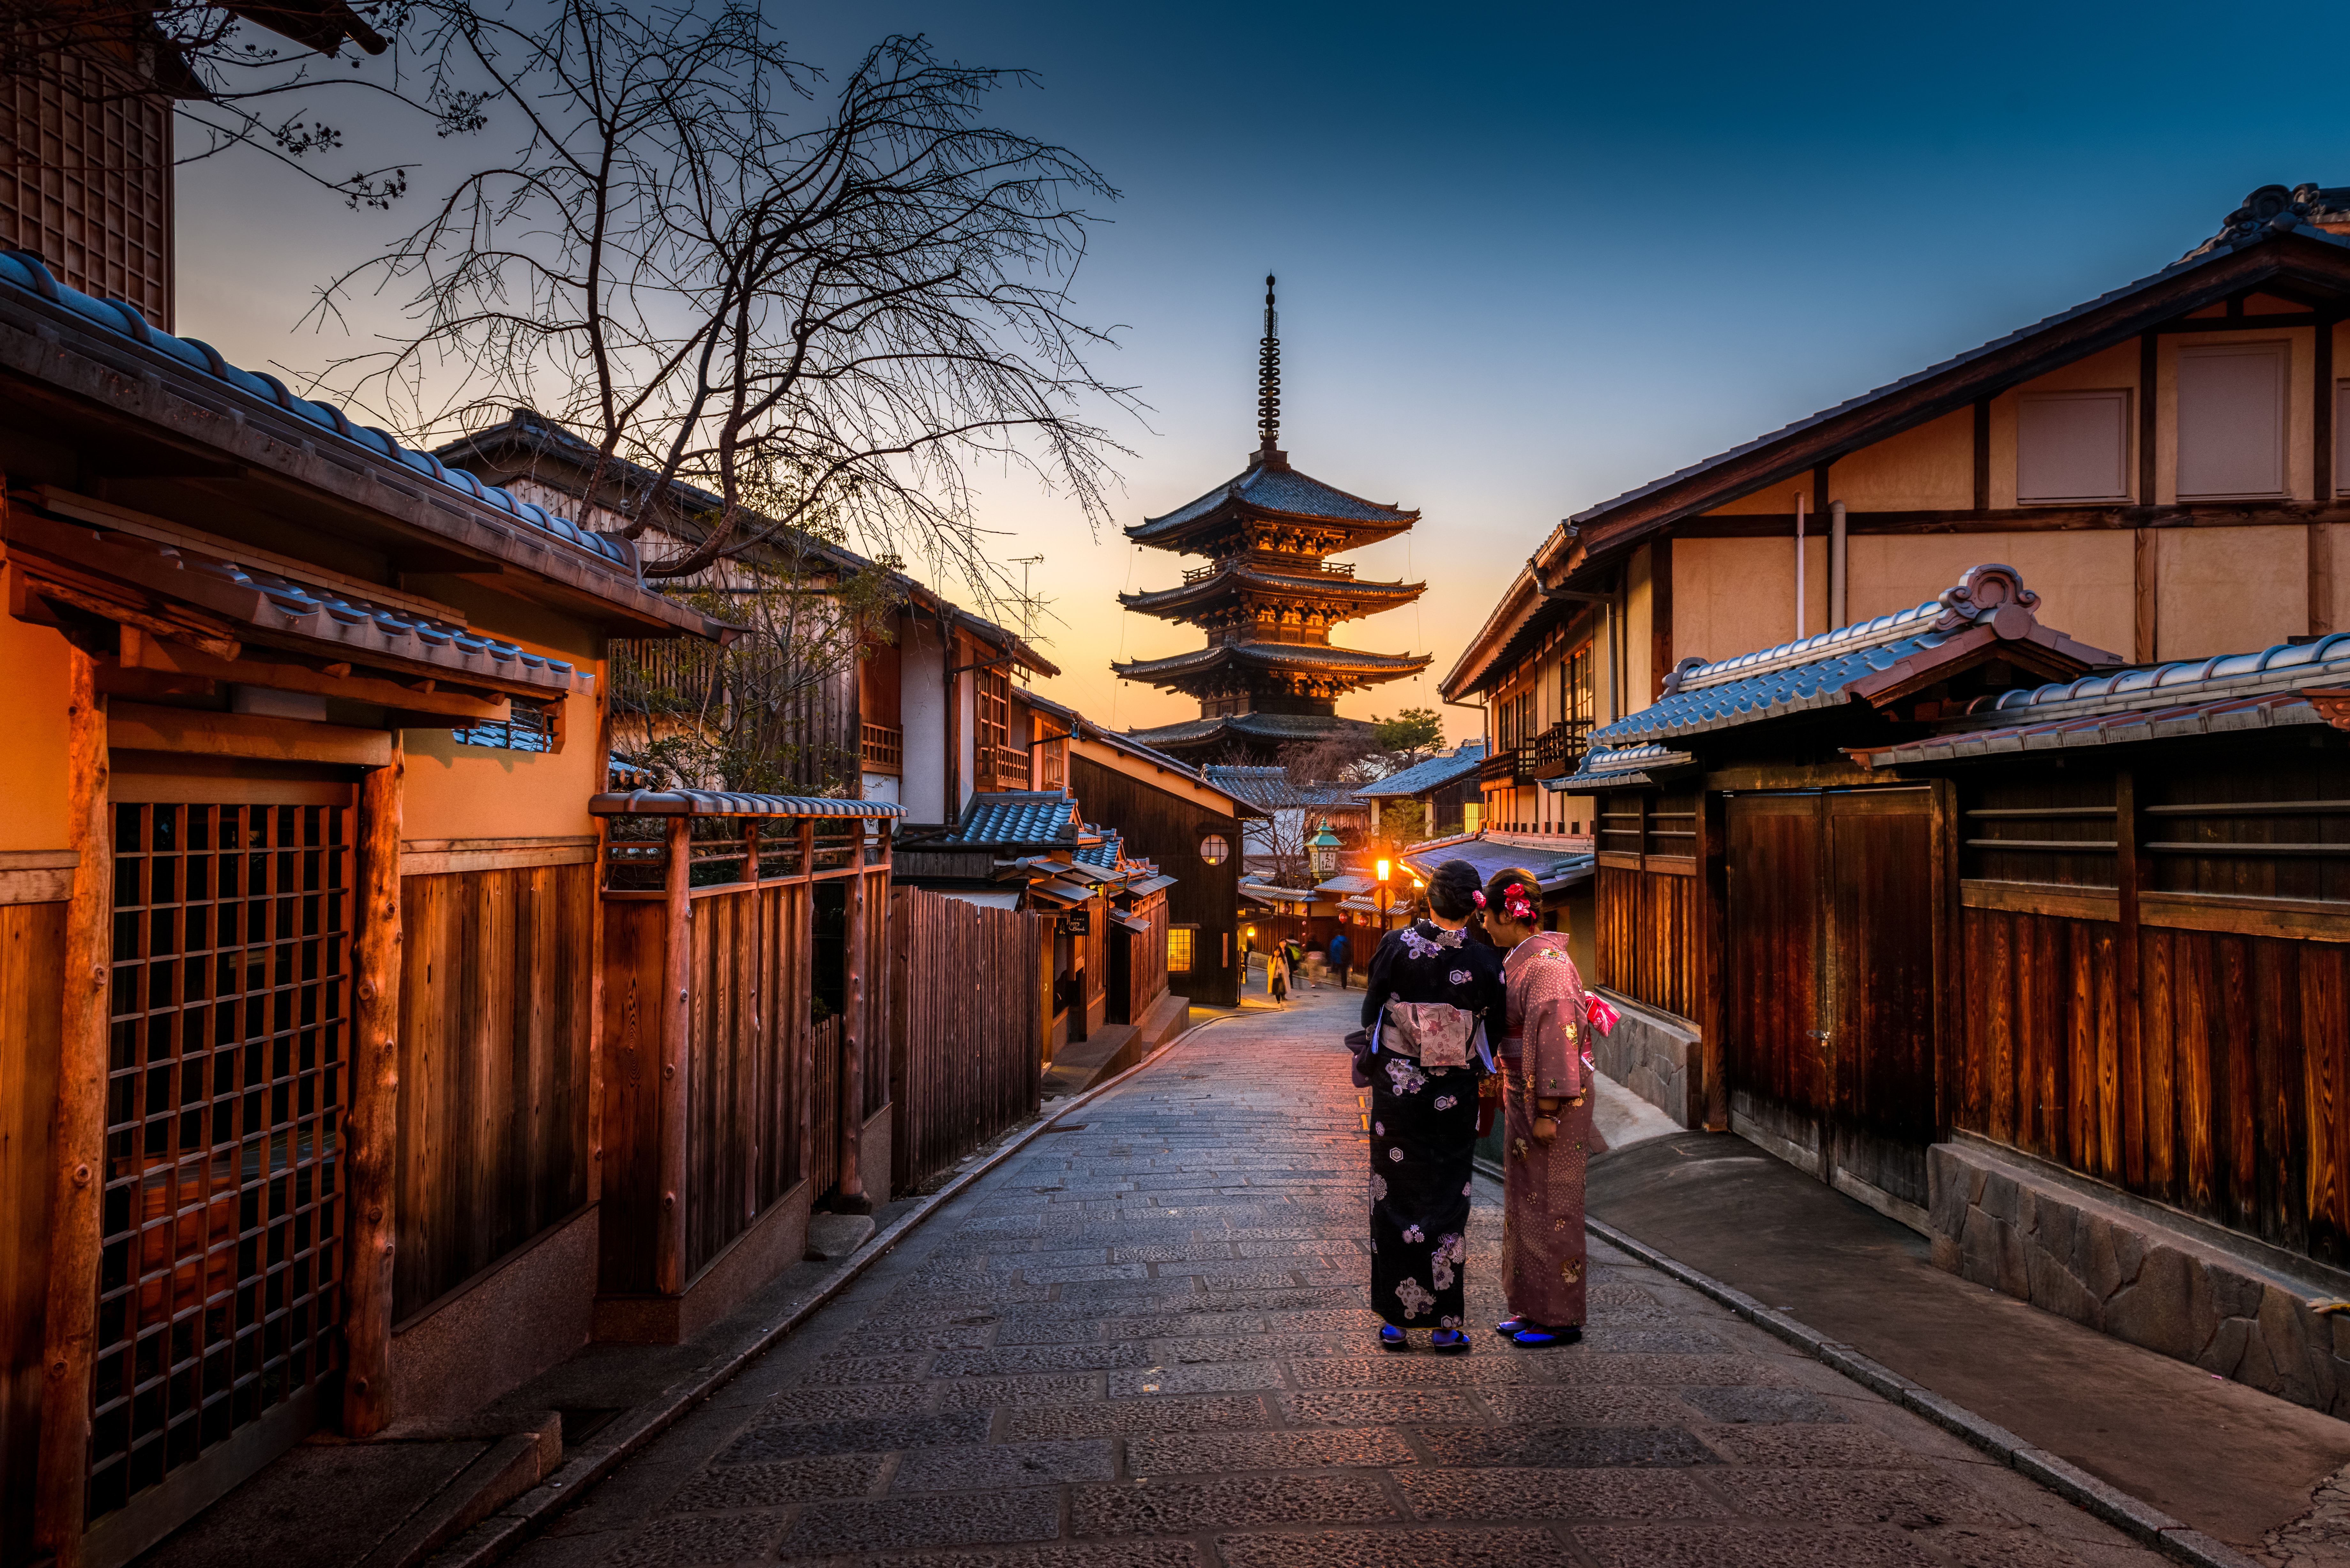 A historic street in Kyoto, Japan